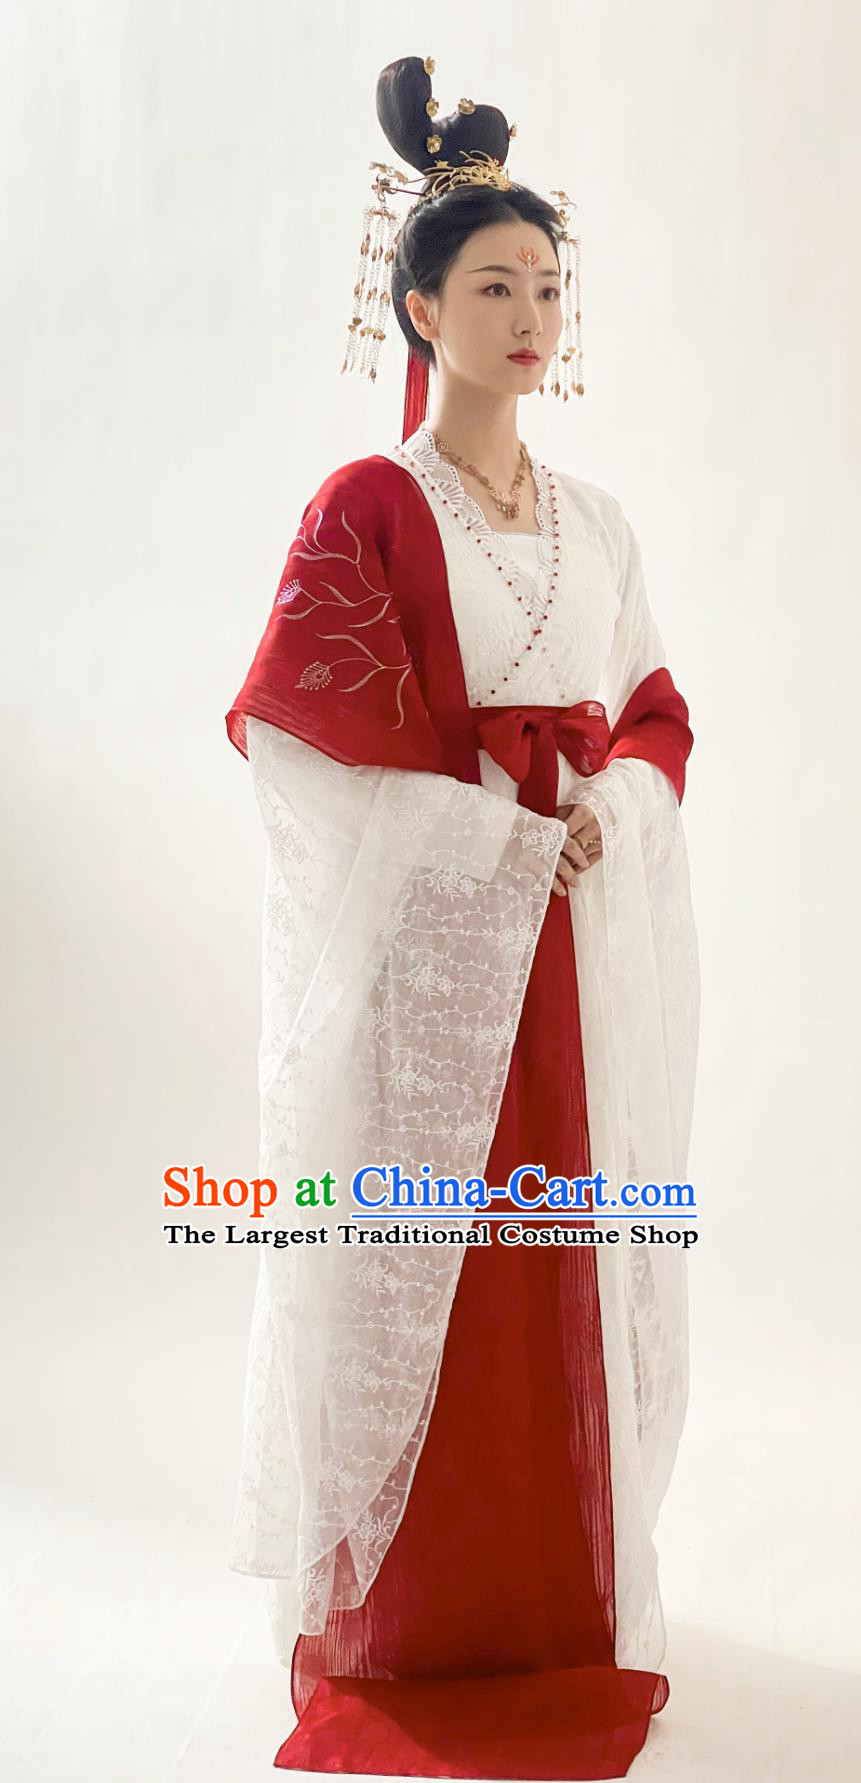 Ancient China Dance Lady Clothing TV Series A Journey To Love Dancer Ling Long White Dress